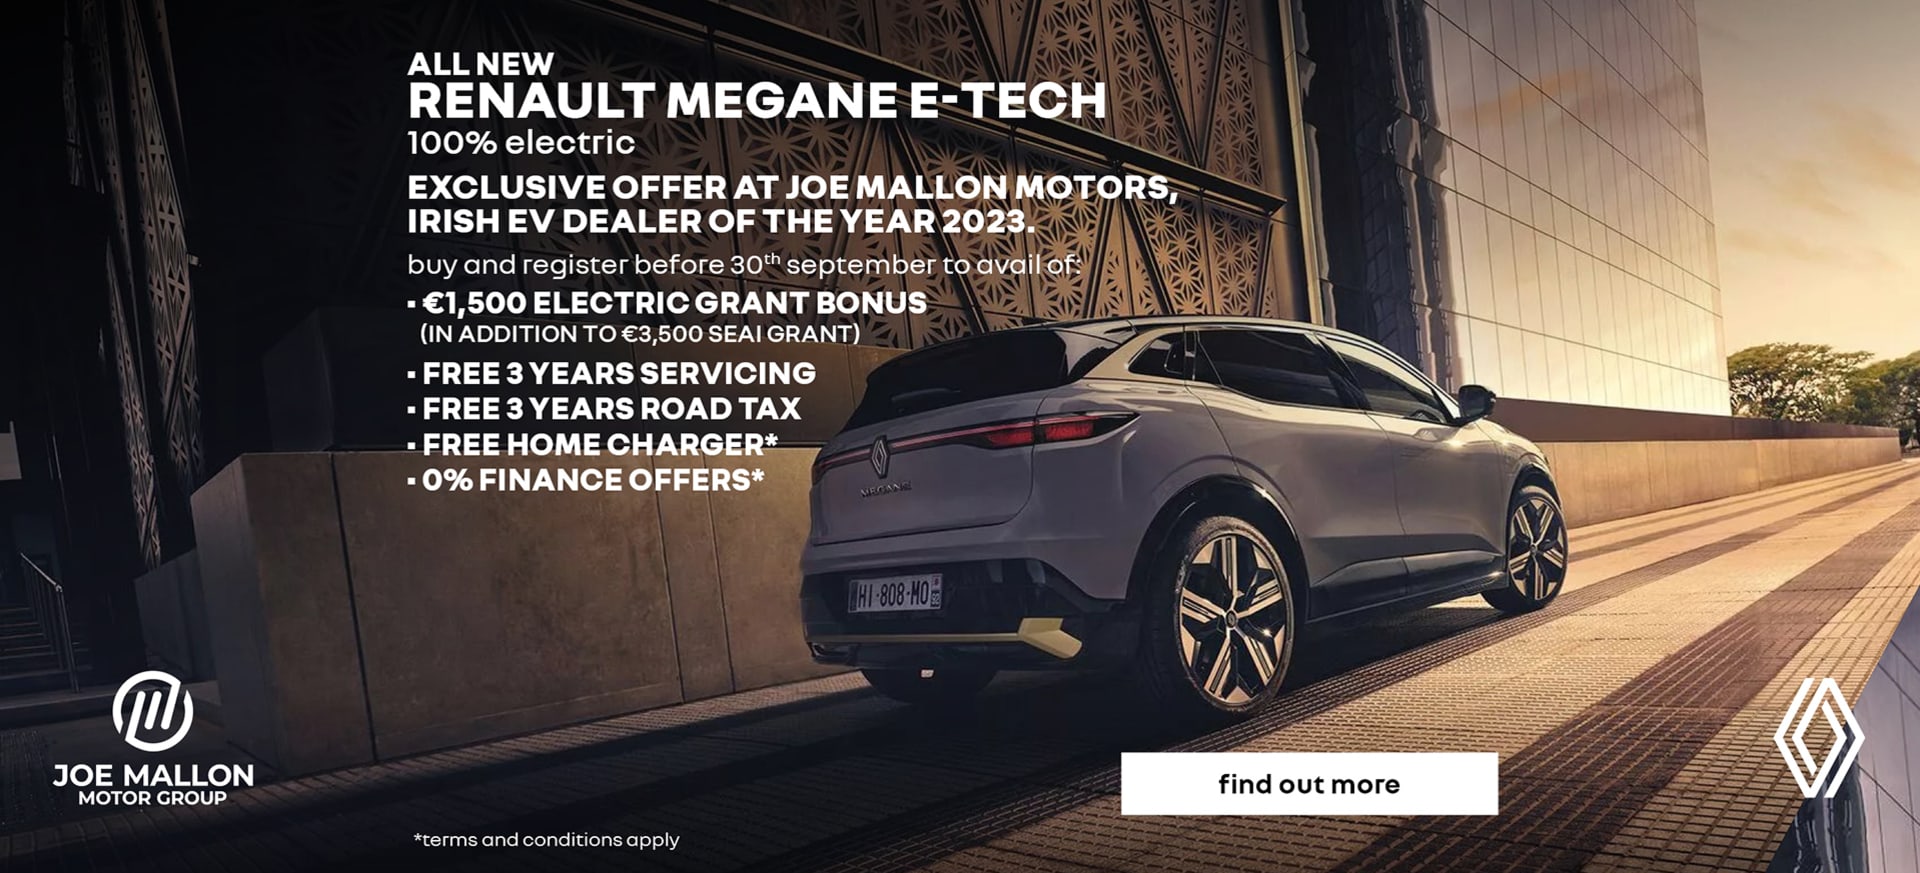 all new Renault Megane E-Tech 100% electric